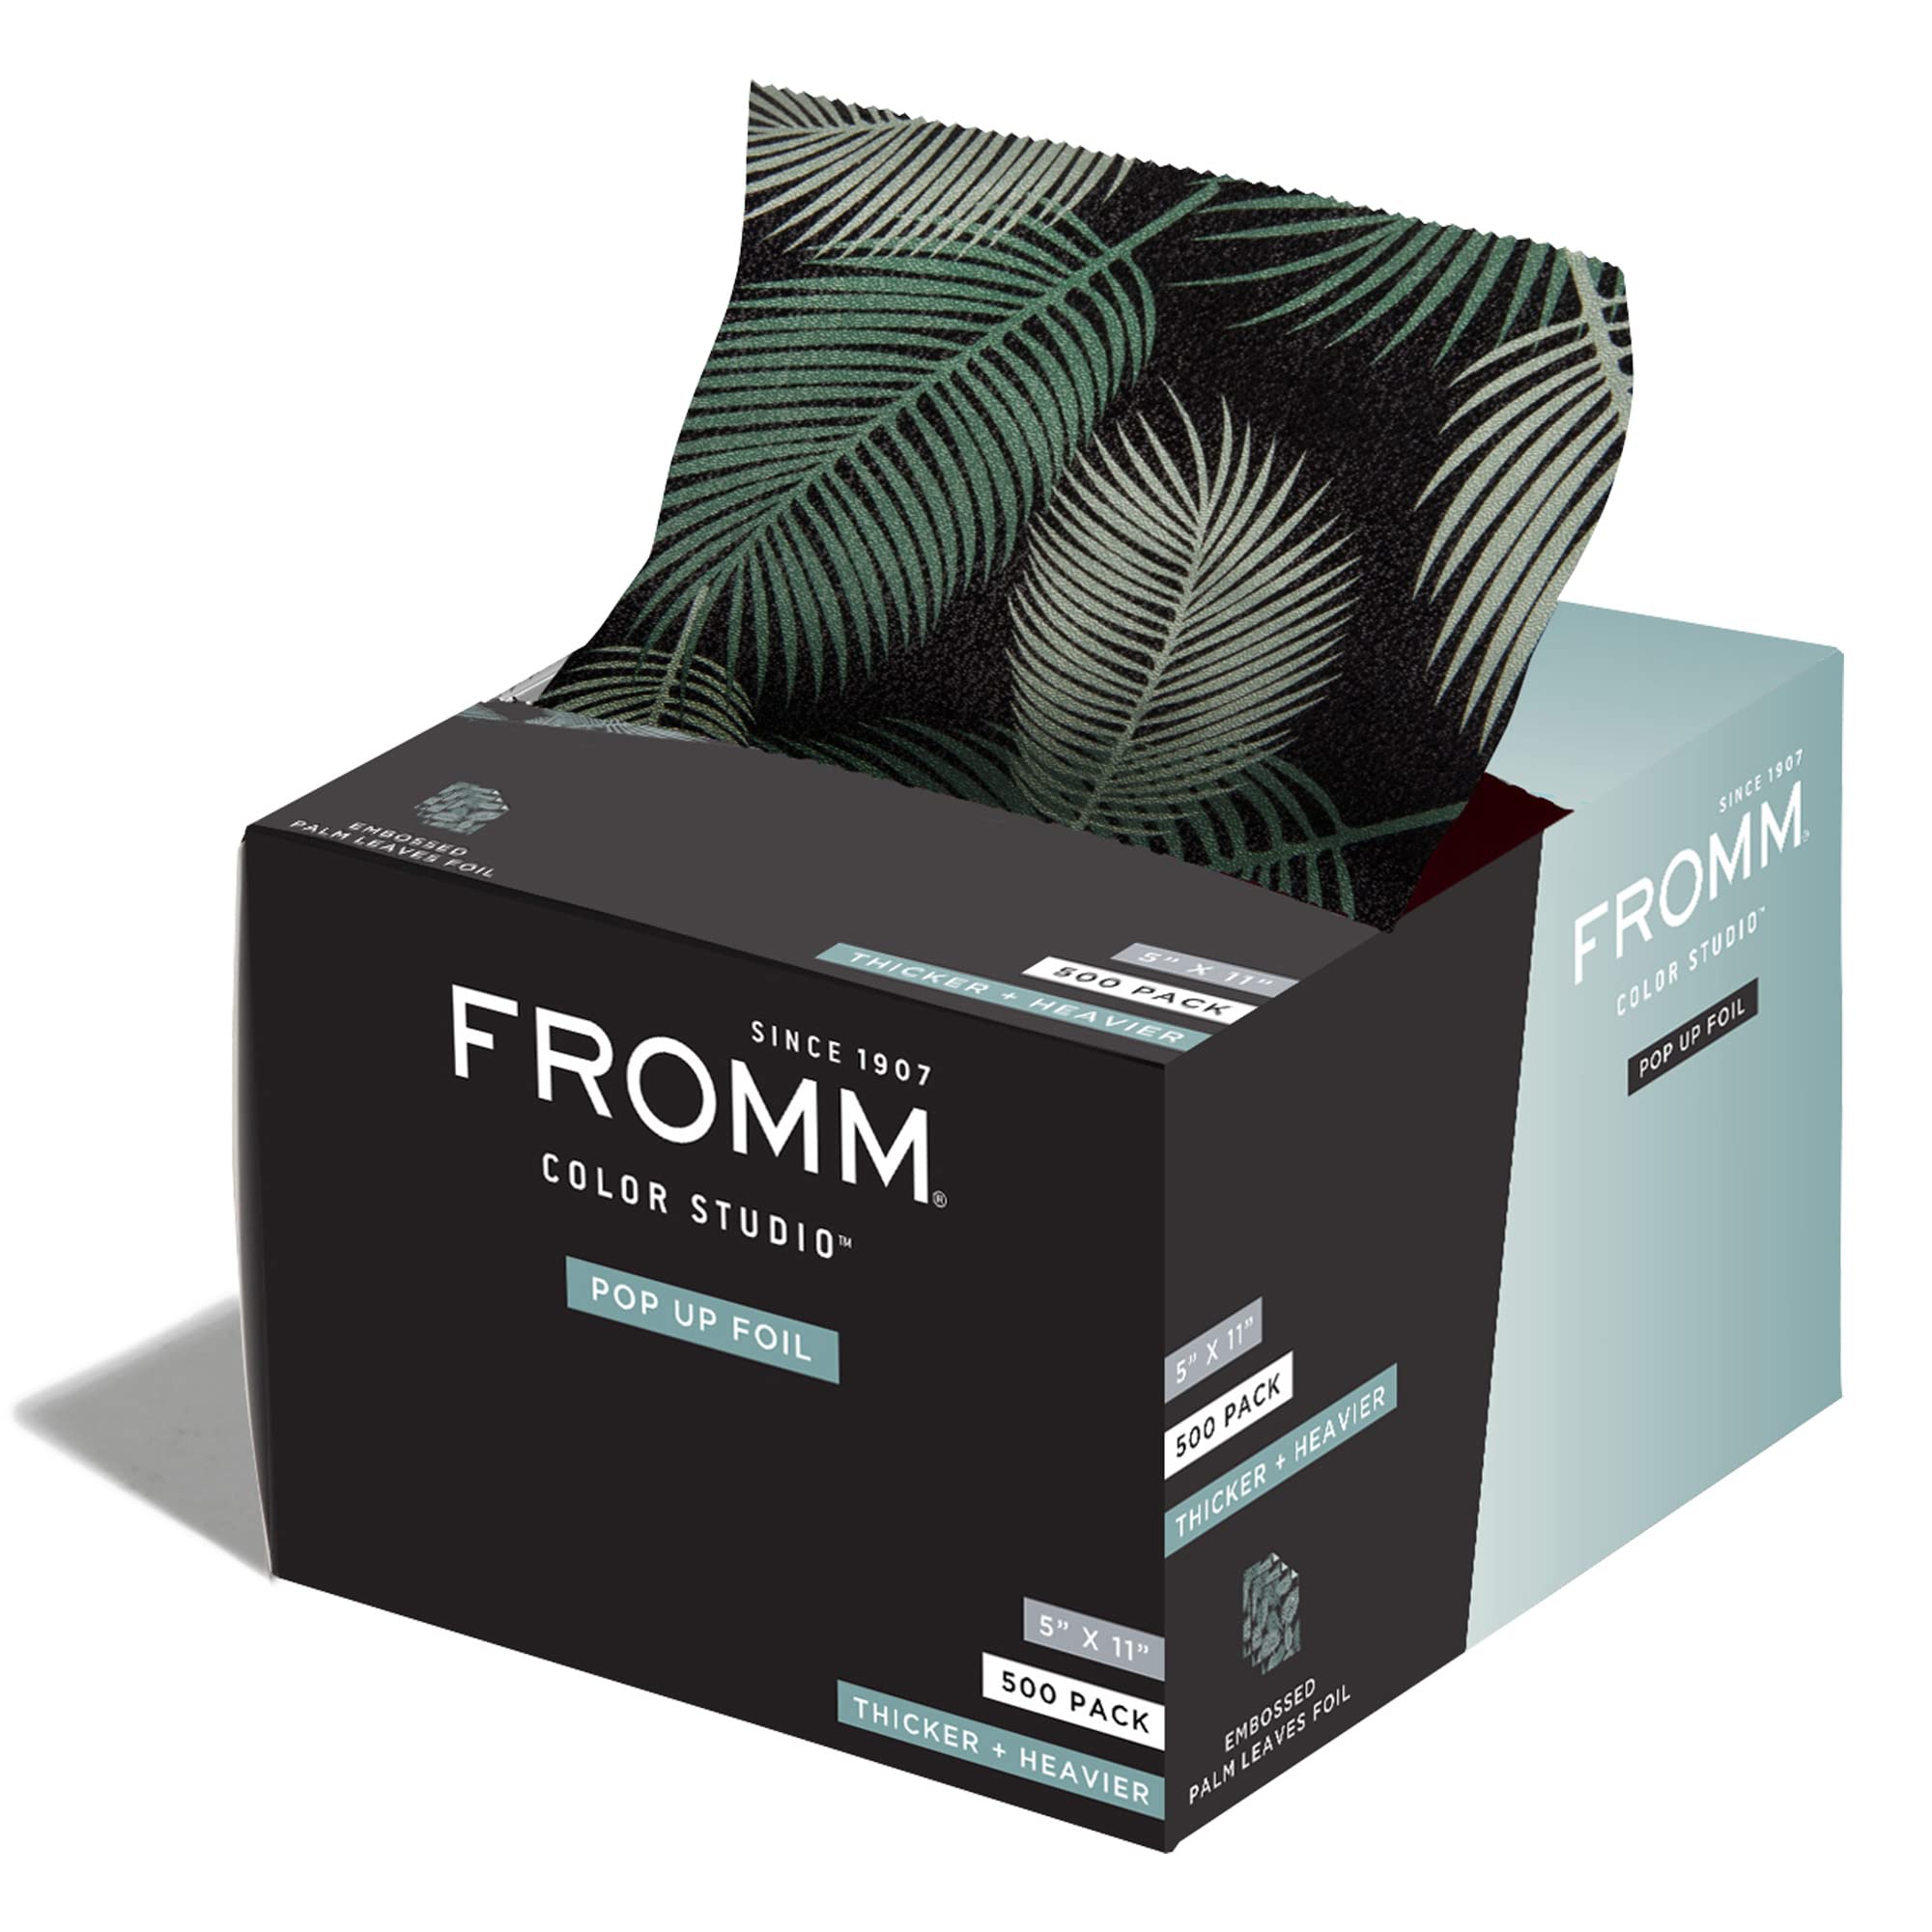 Fromm Color Studio Pop Up Hair Foil in Palms Leaves Pattern 5 x 11